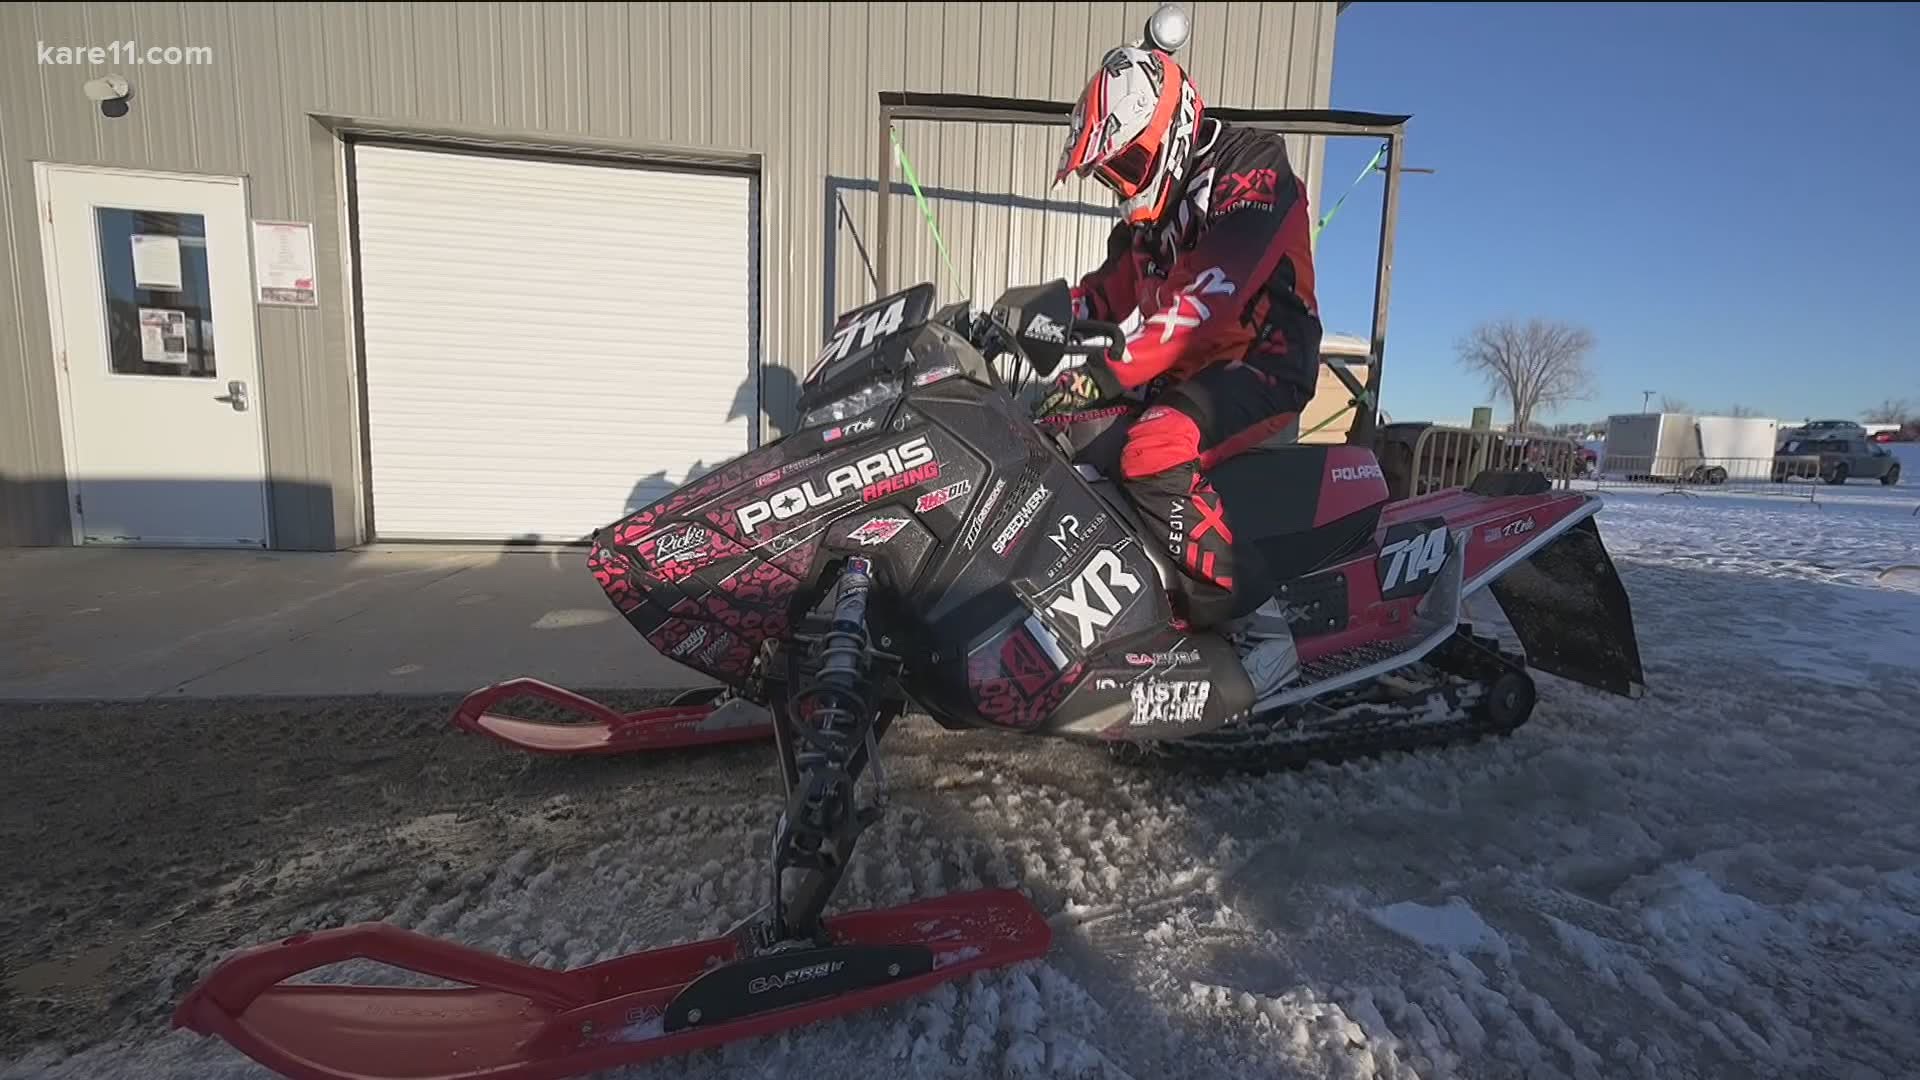 The winter sports industry is pleased to see so much interest, but there have been some tragic and high-profile snowmobile incidents lately.